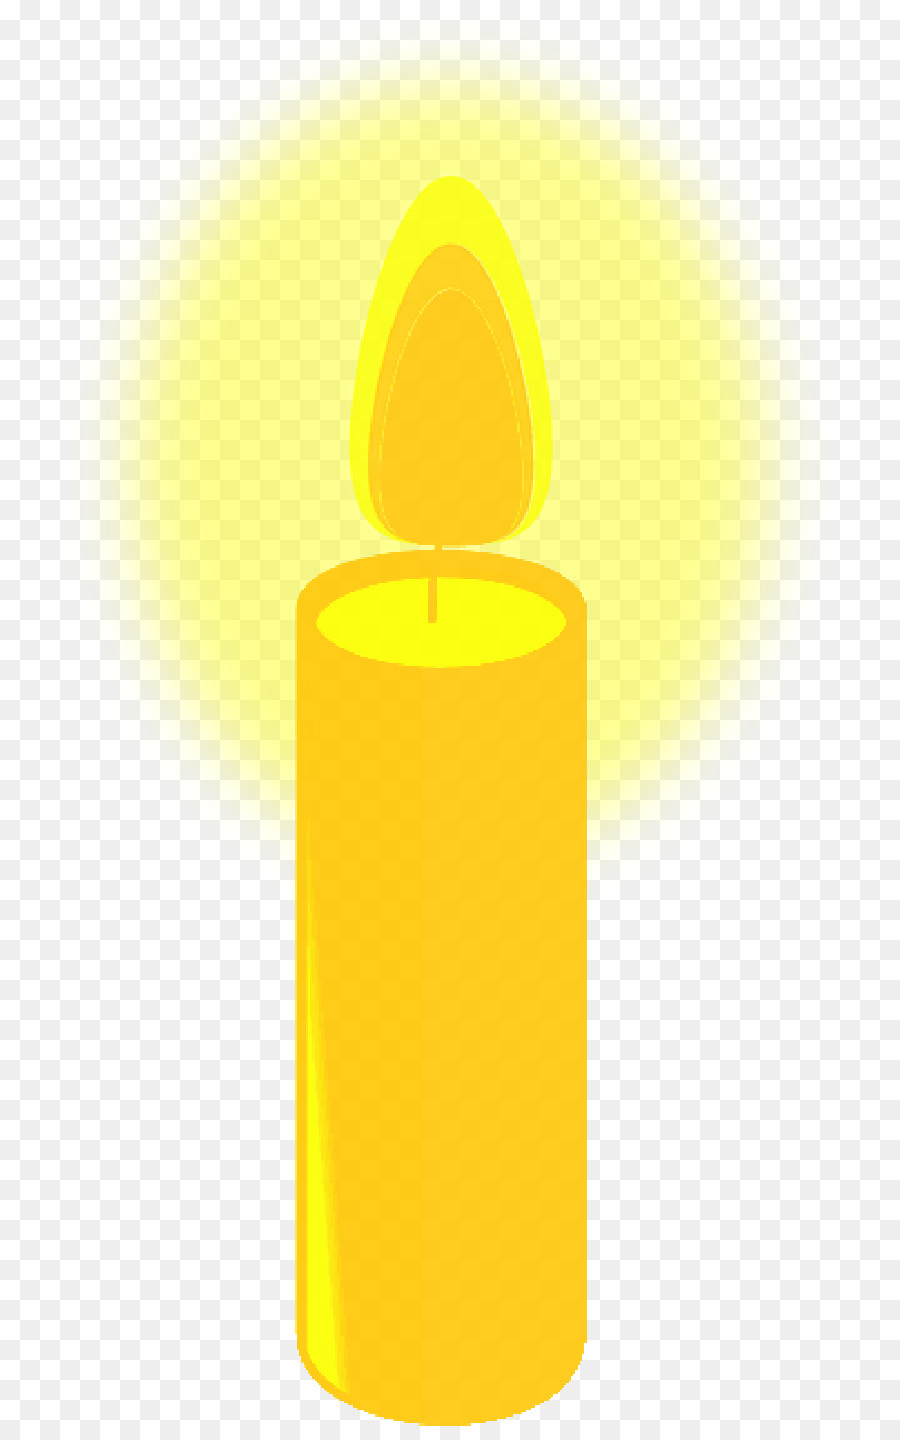 Wax Flameless candle Cylinder Product design - candle flame png download - 800*1426 - Free Transparent Wax png Download.